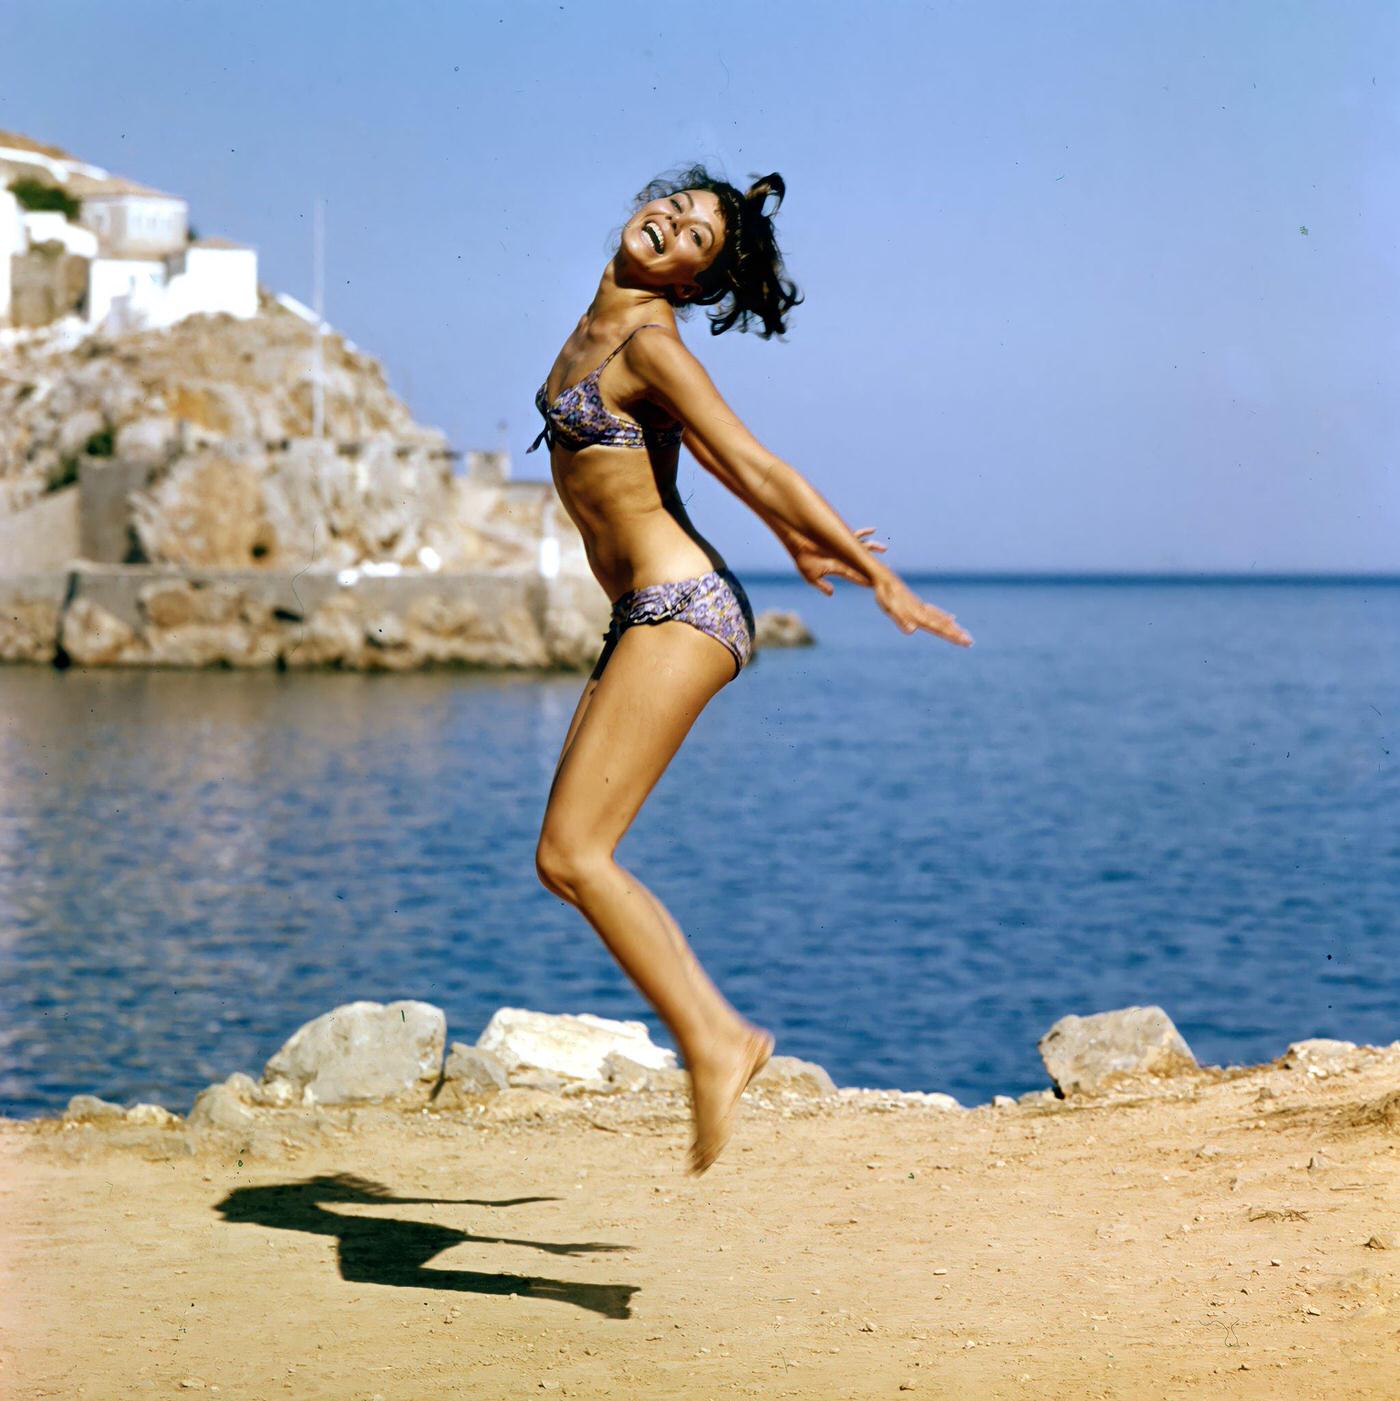 Giorgia Moll happily jumping at the beach, filming 'Island of Love,' Greece, 1962